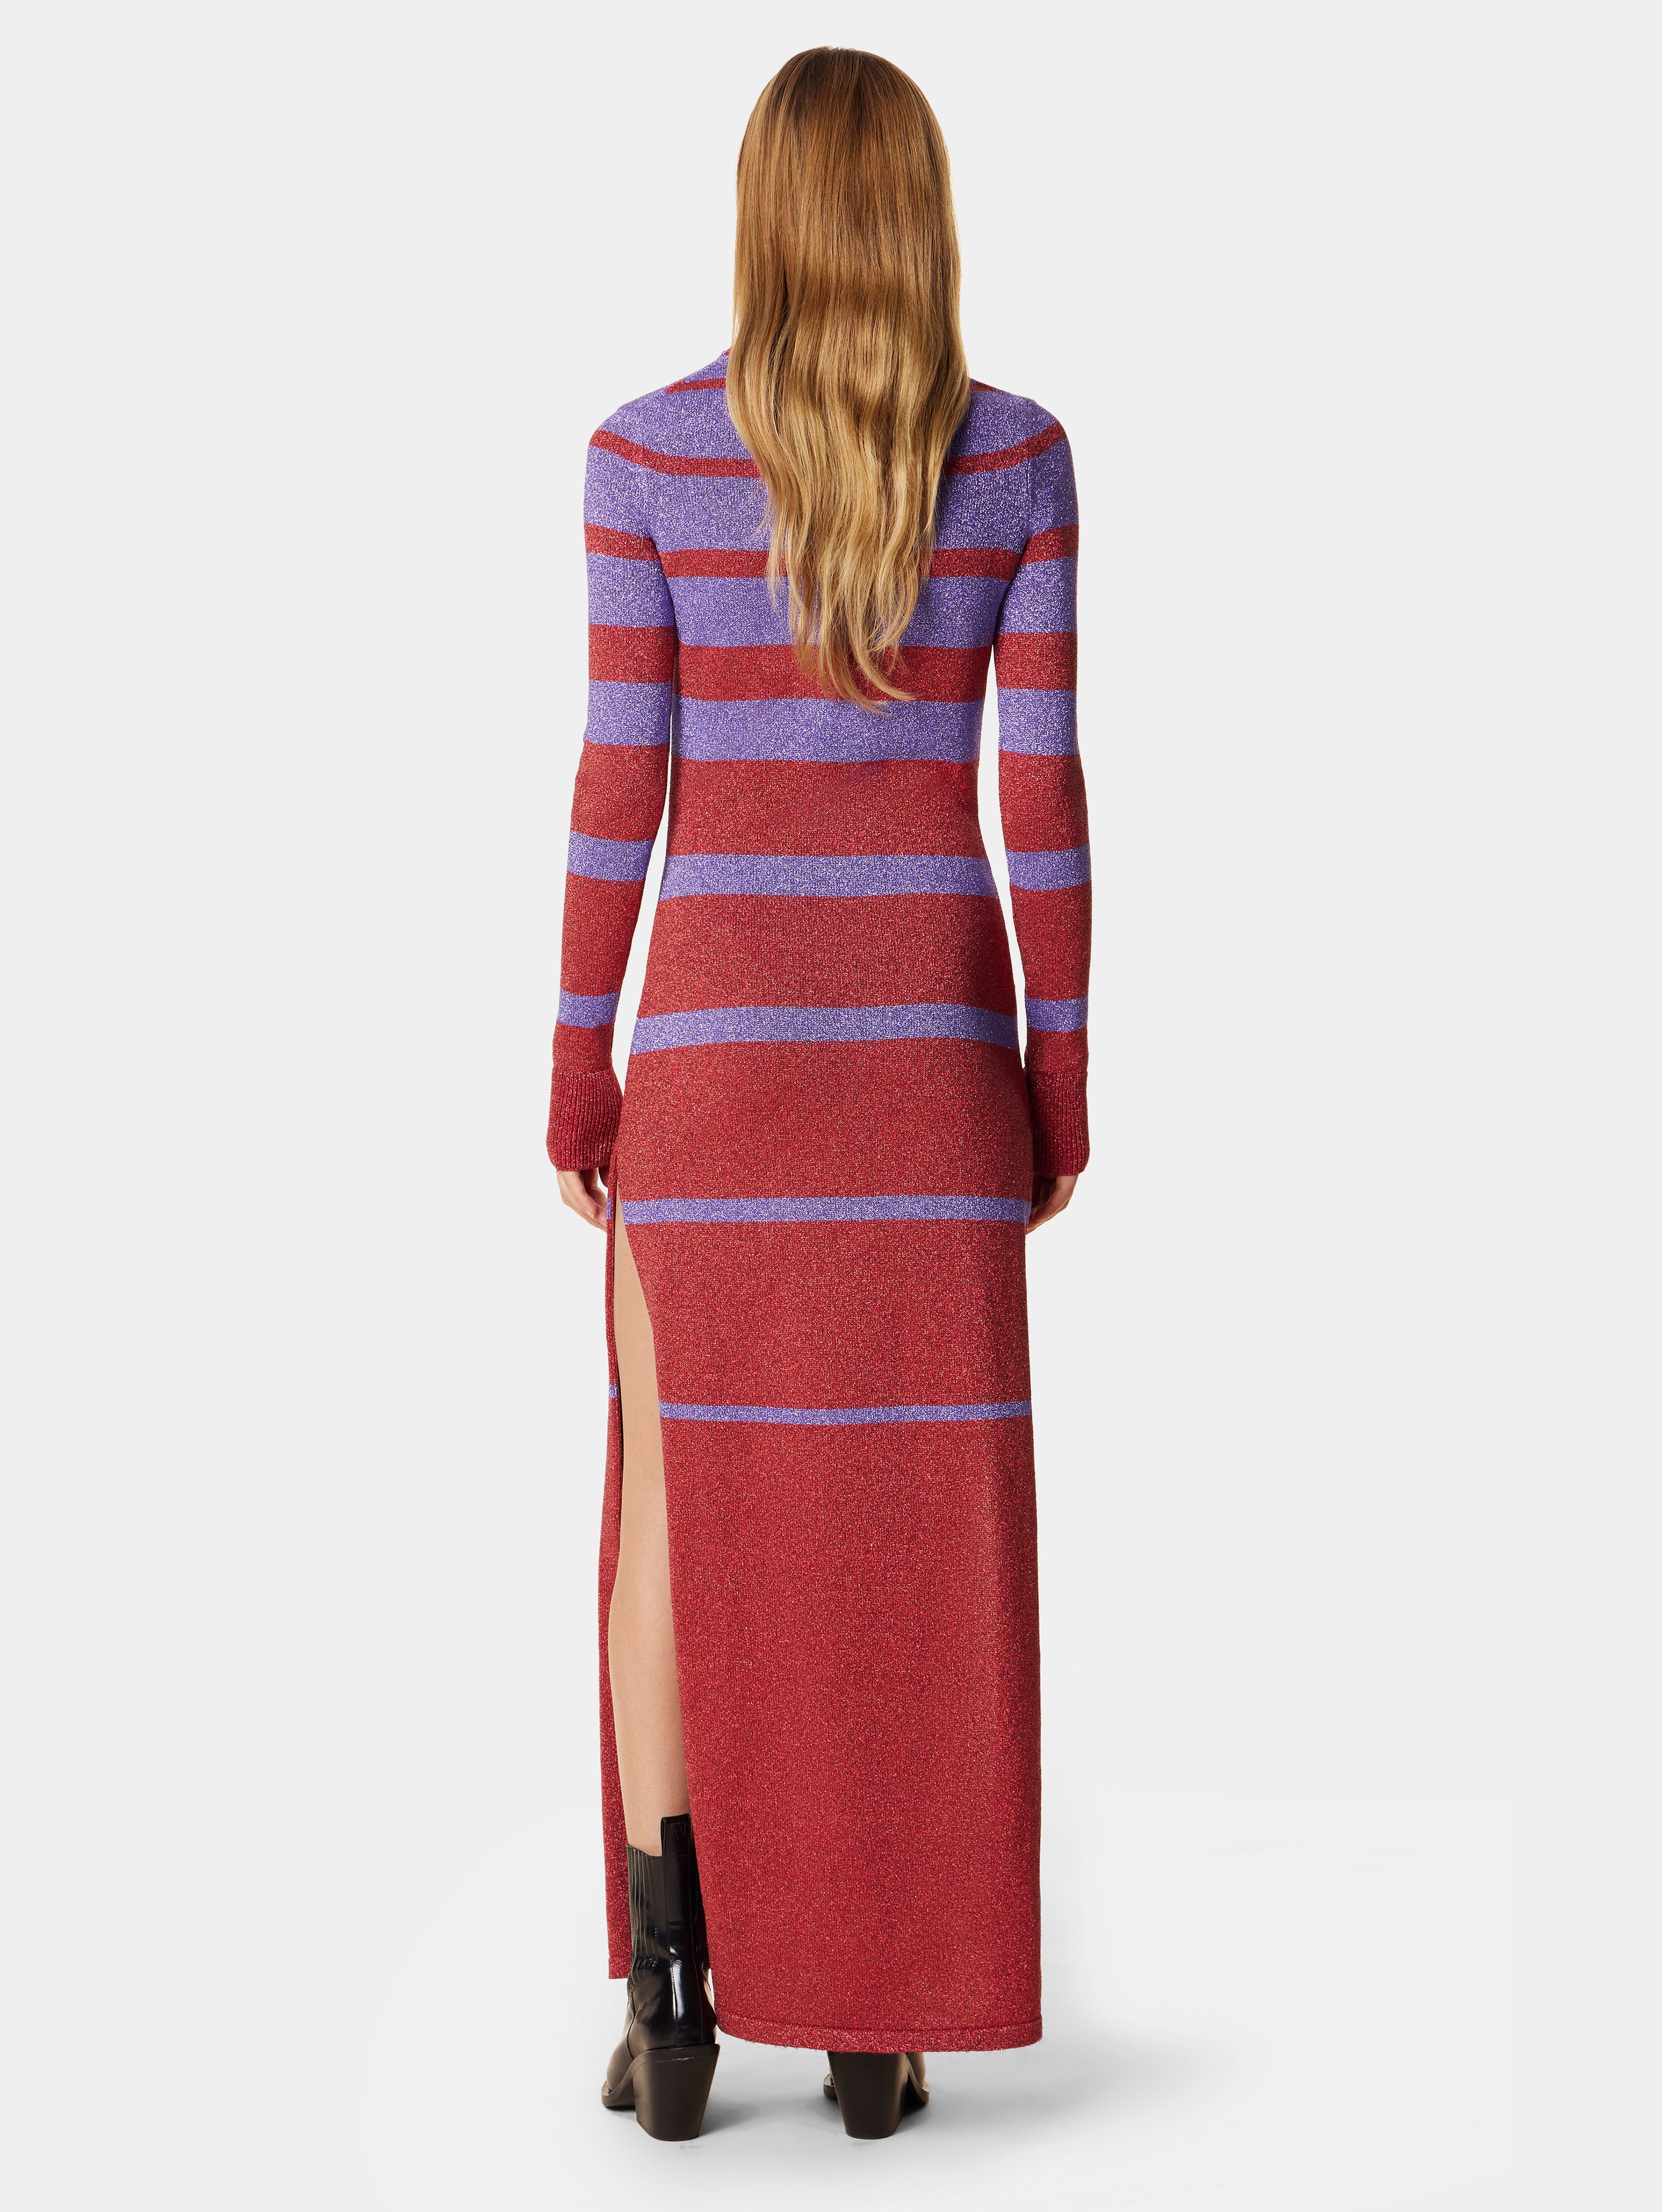 RED AND VIOLET LONG-SLEEVED DRESS - 3